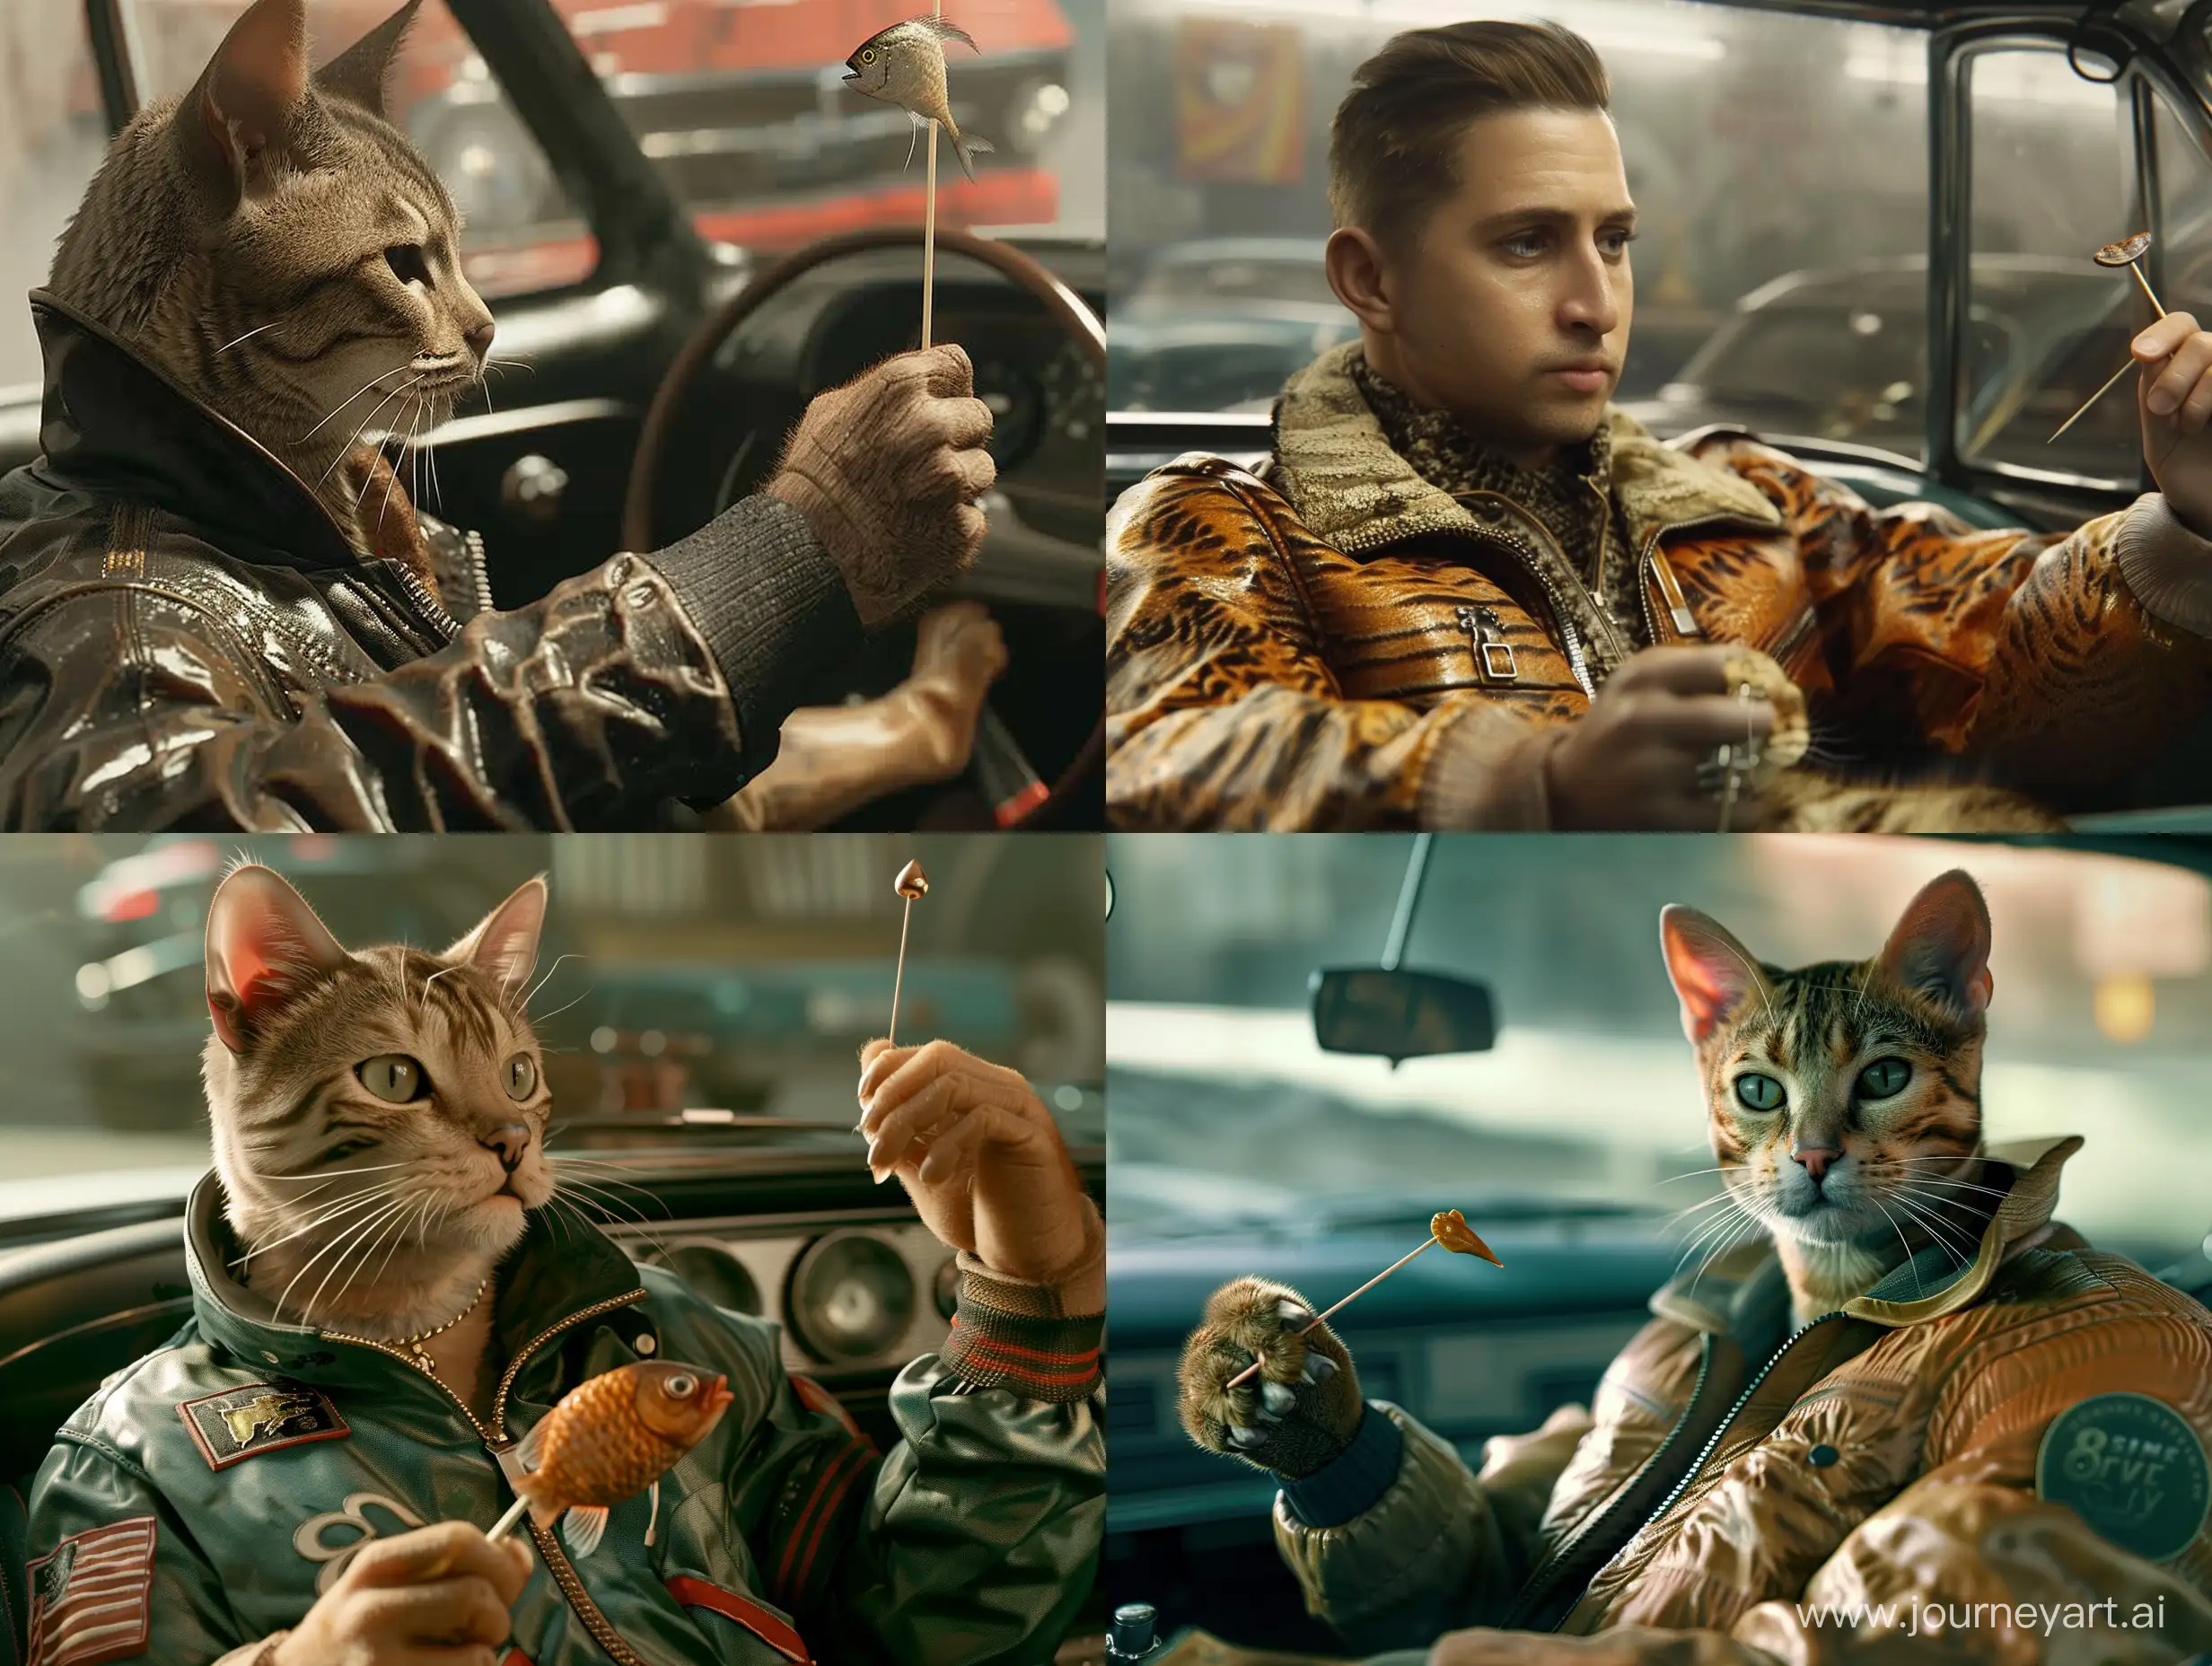 a cat in a bomber jacket from the movie "drive". in the image of Ryan Gosling with a toothpick and a fish in his paw. He's sitting in the car and watching noirily. 8L unreal engine